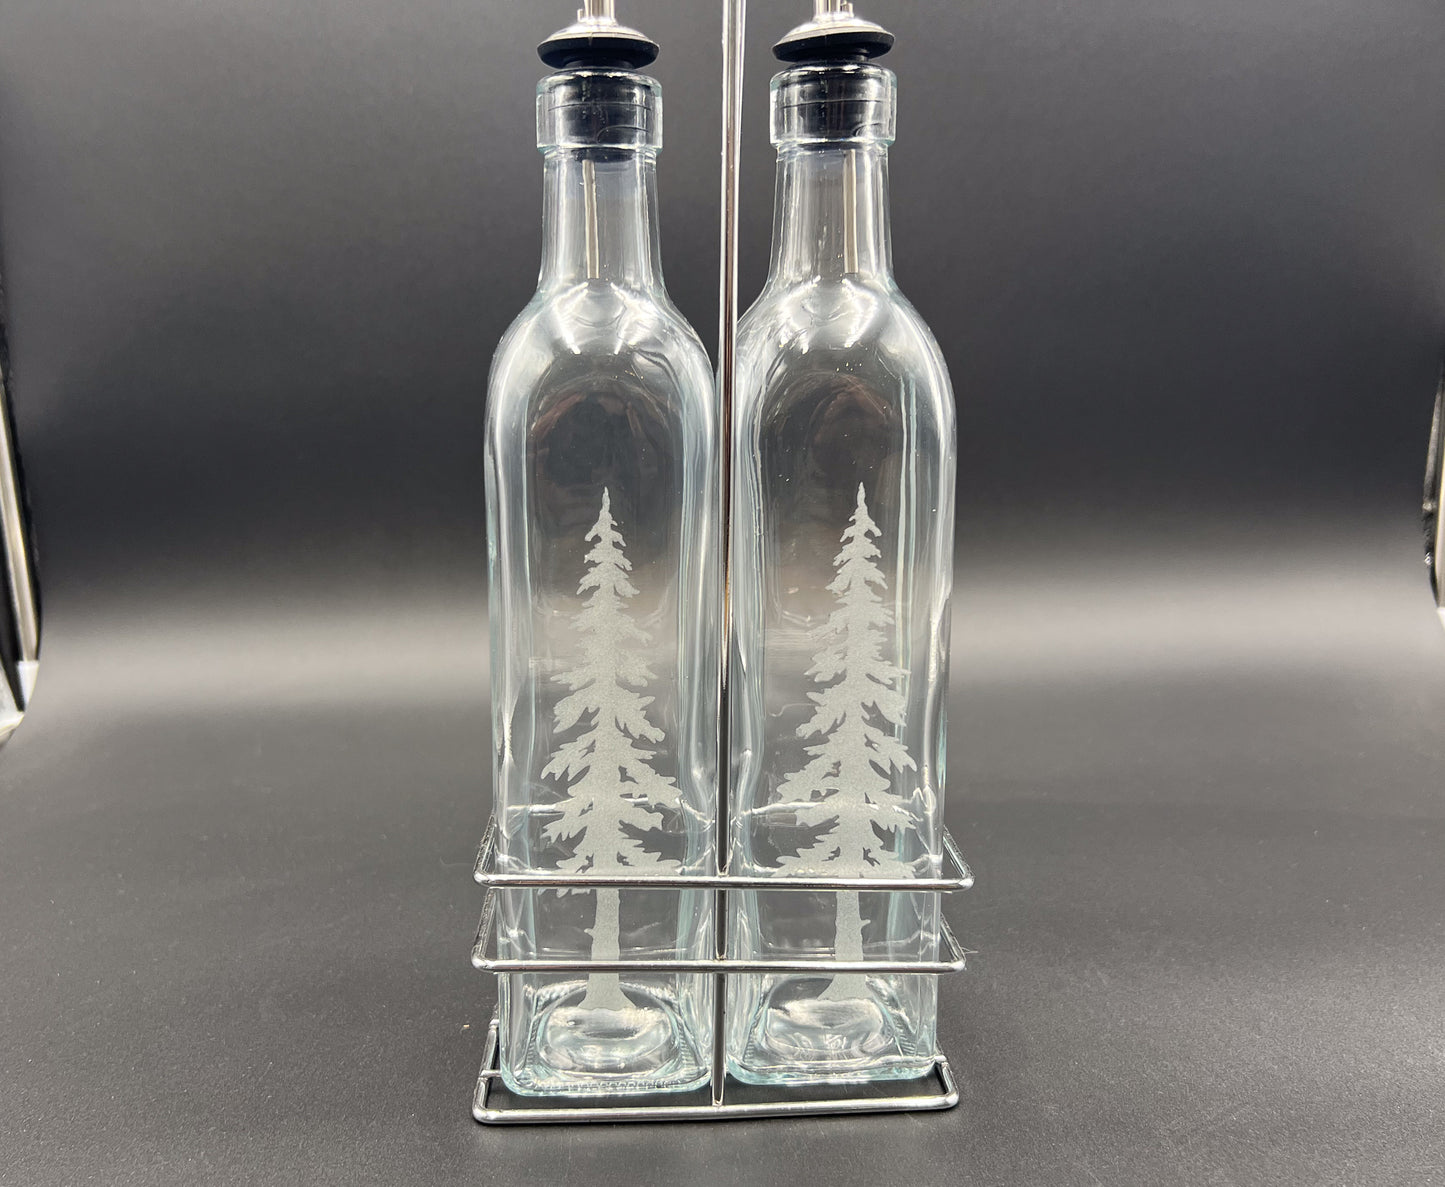 Oil and Vinegar set - Engraved with Trees